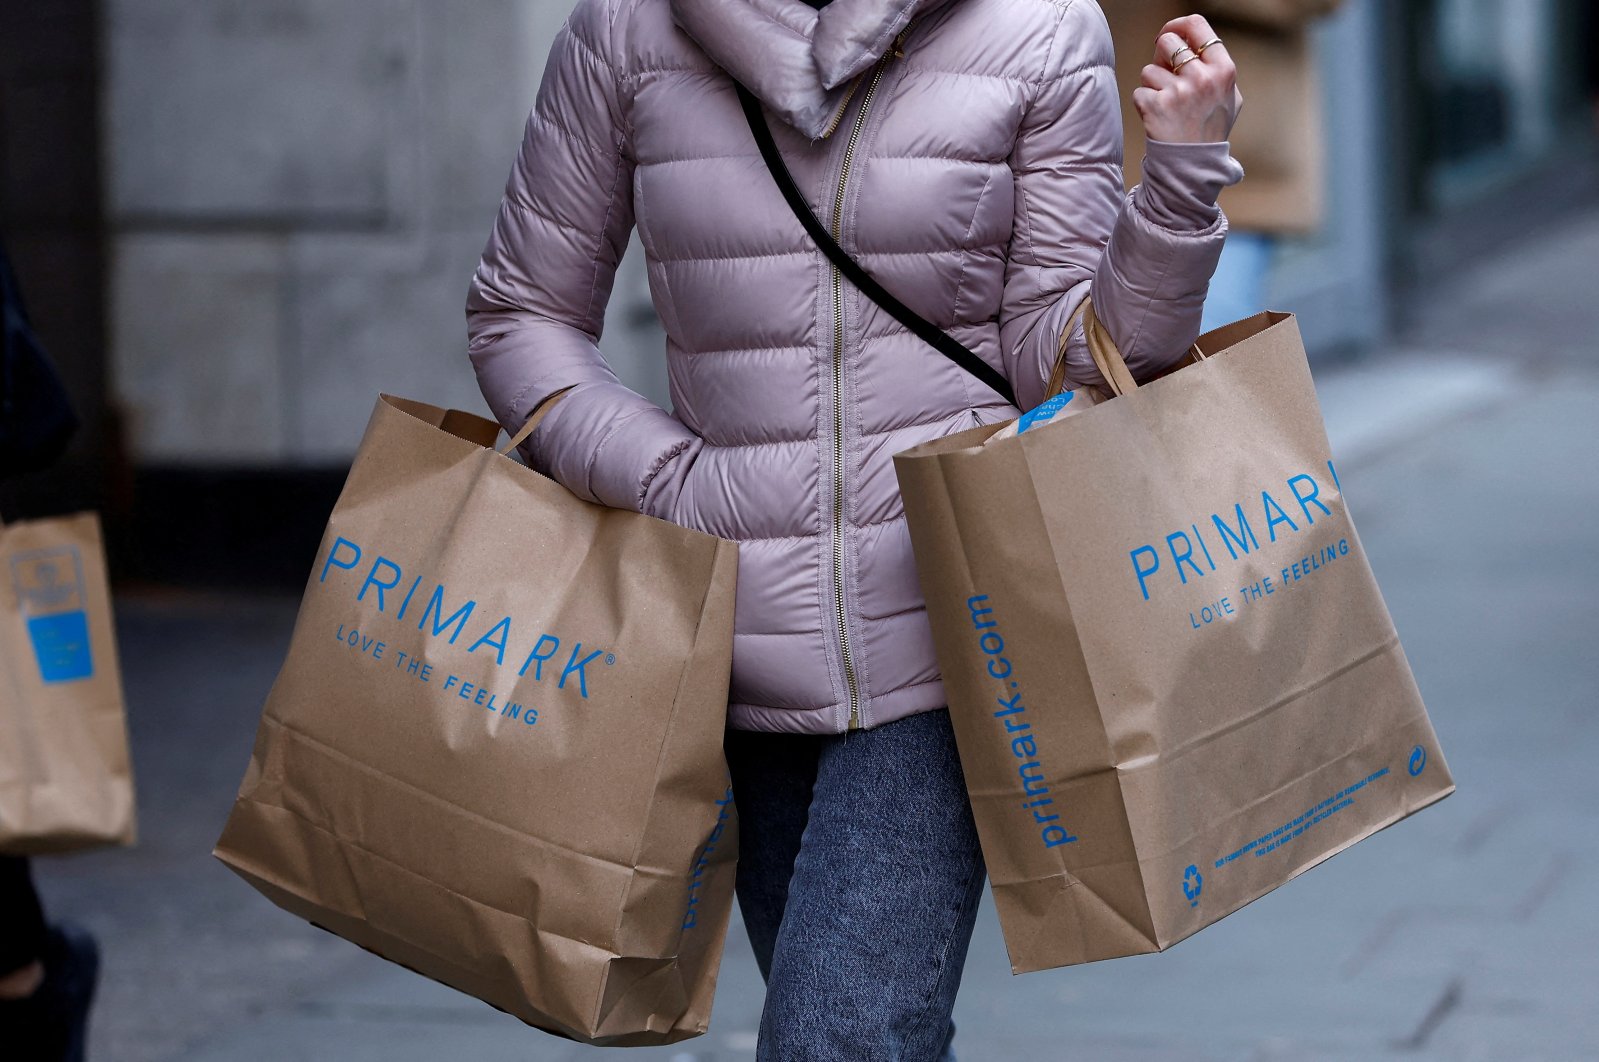 A woman carries Primark shopping bags on Oxford Street, in London, Britain, Jan. 16, 2023. (Reuters Photo)